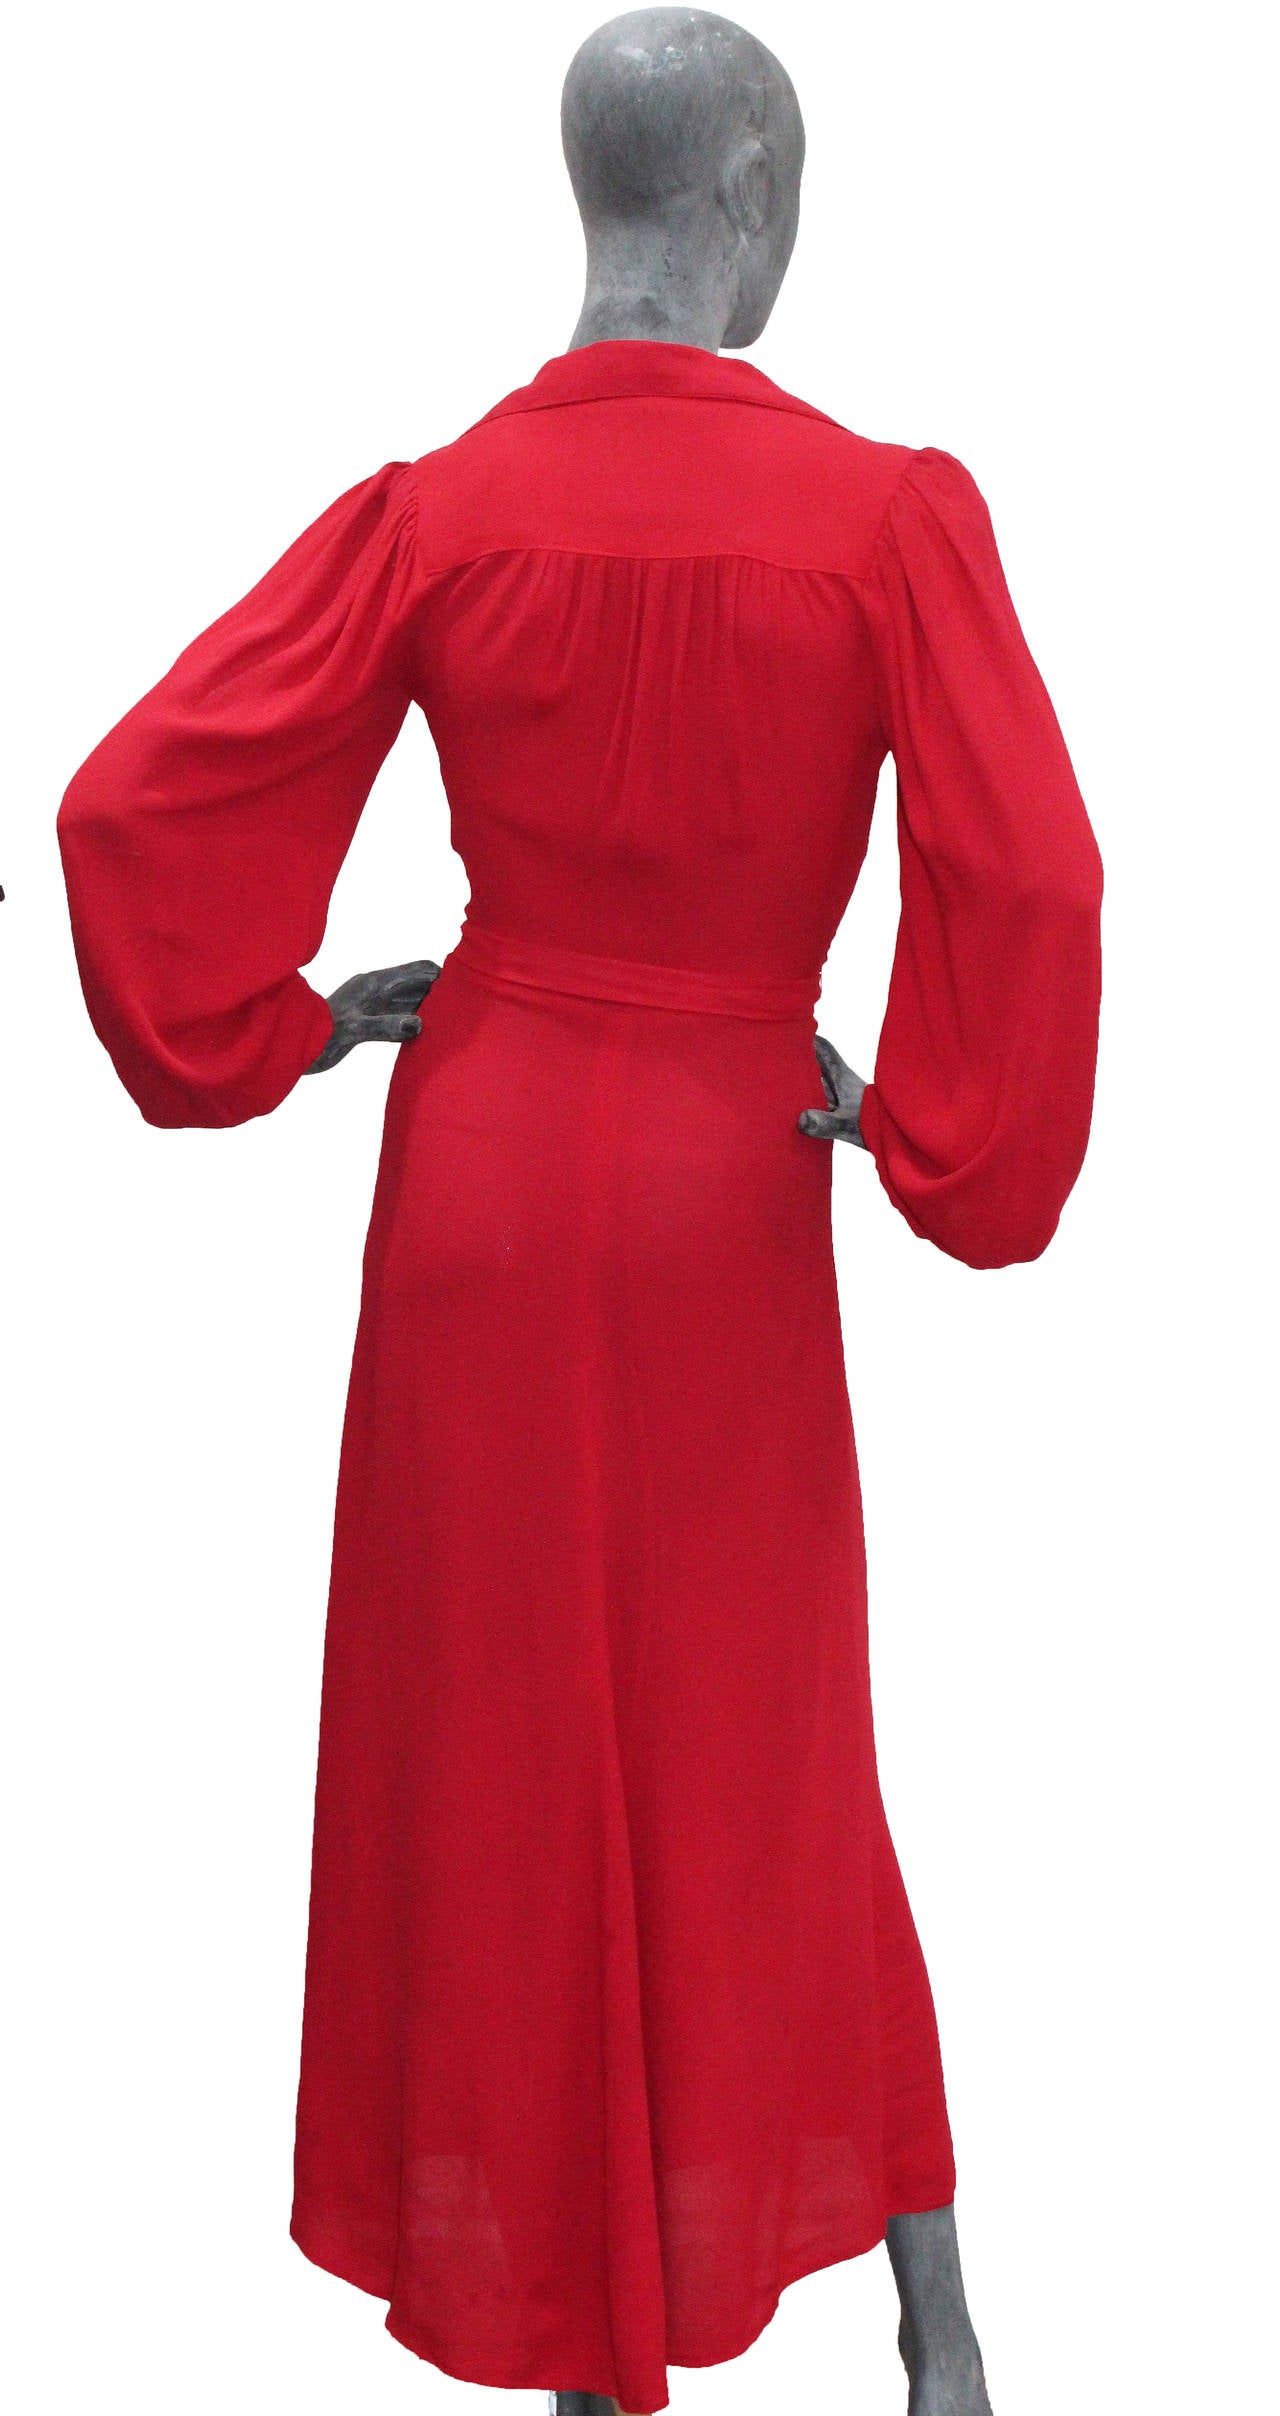 Women's Iconic Ossie Clark shocking red moss crepe evening gown c. 1974